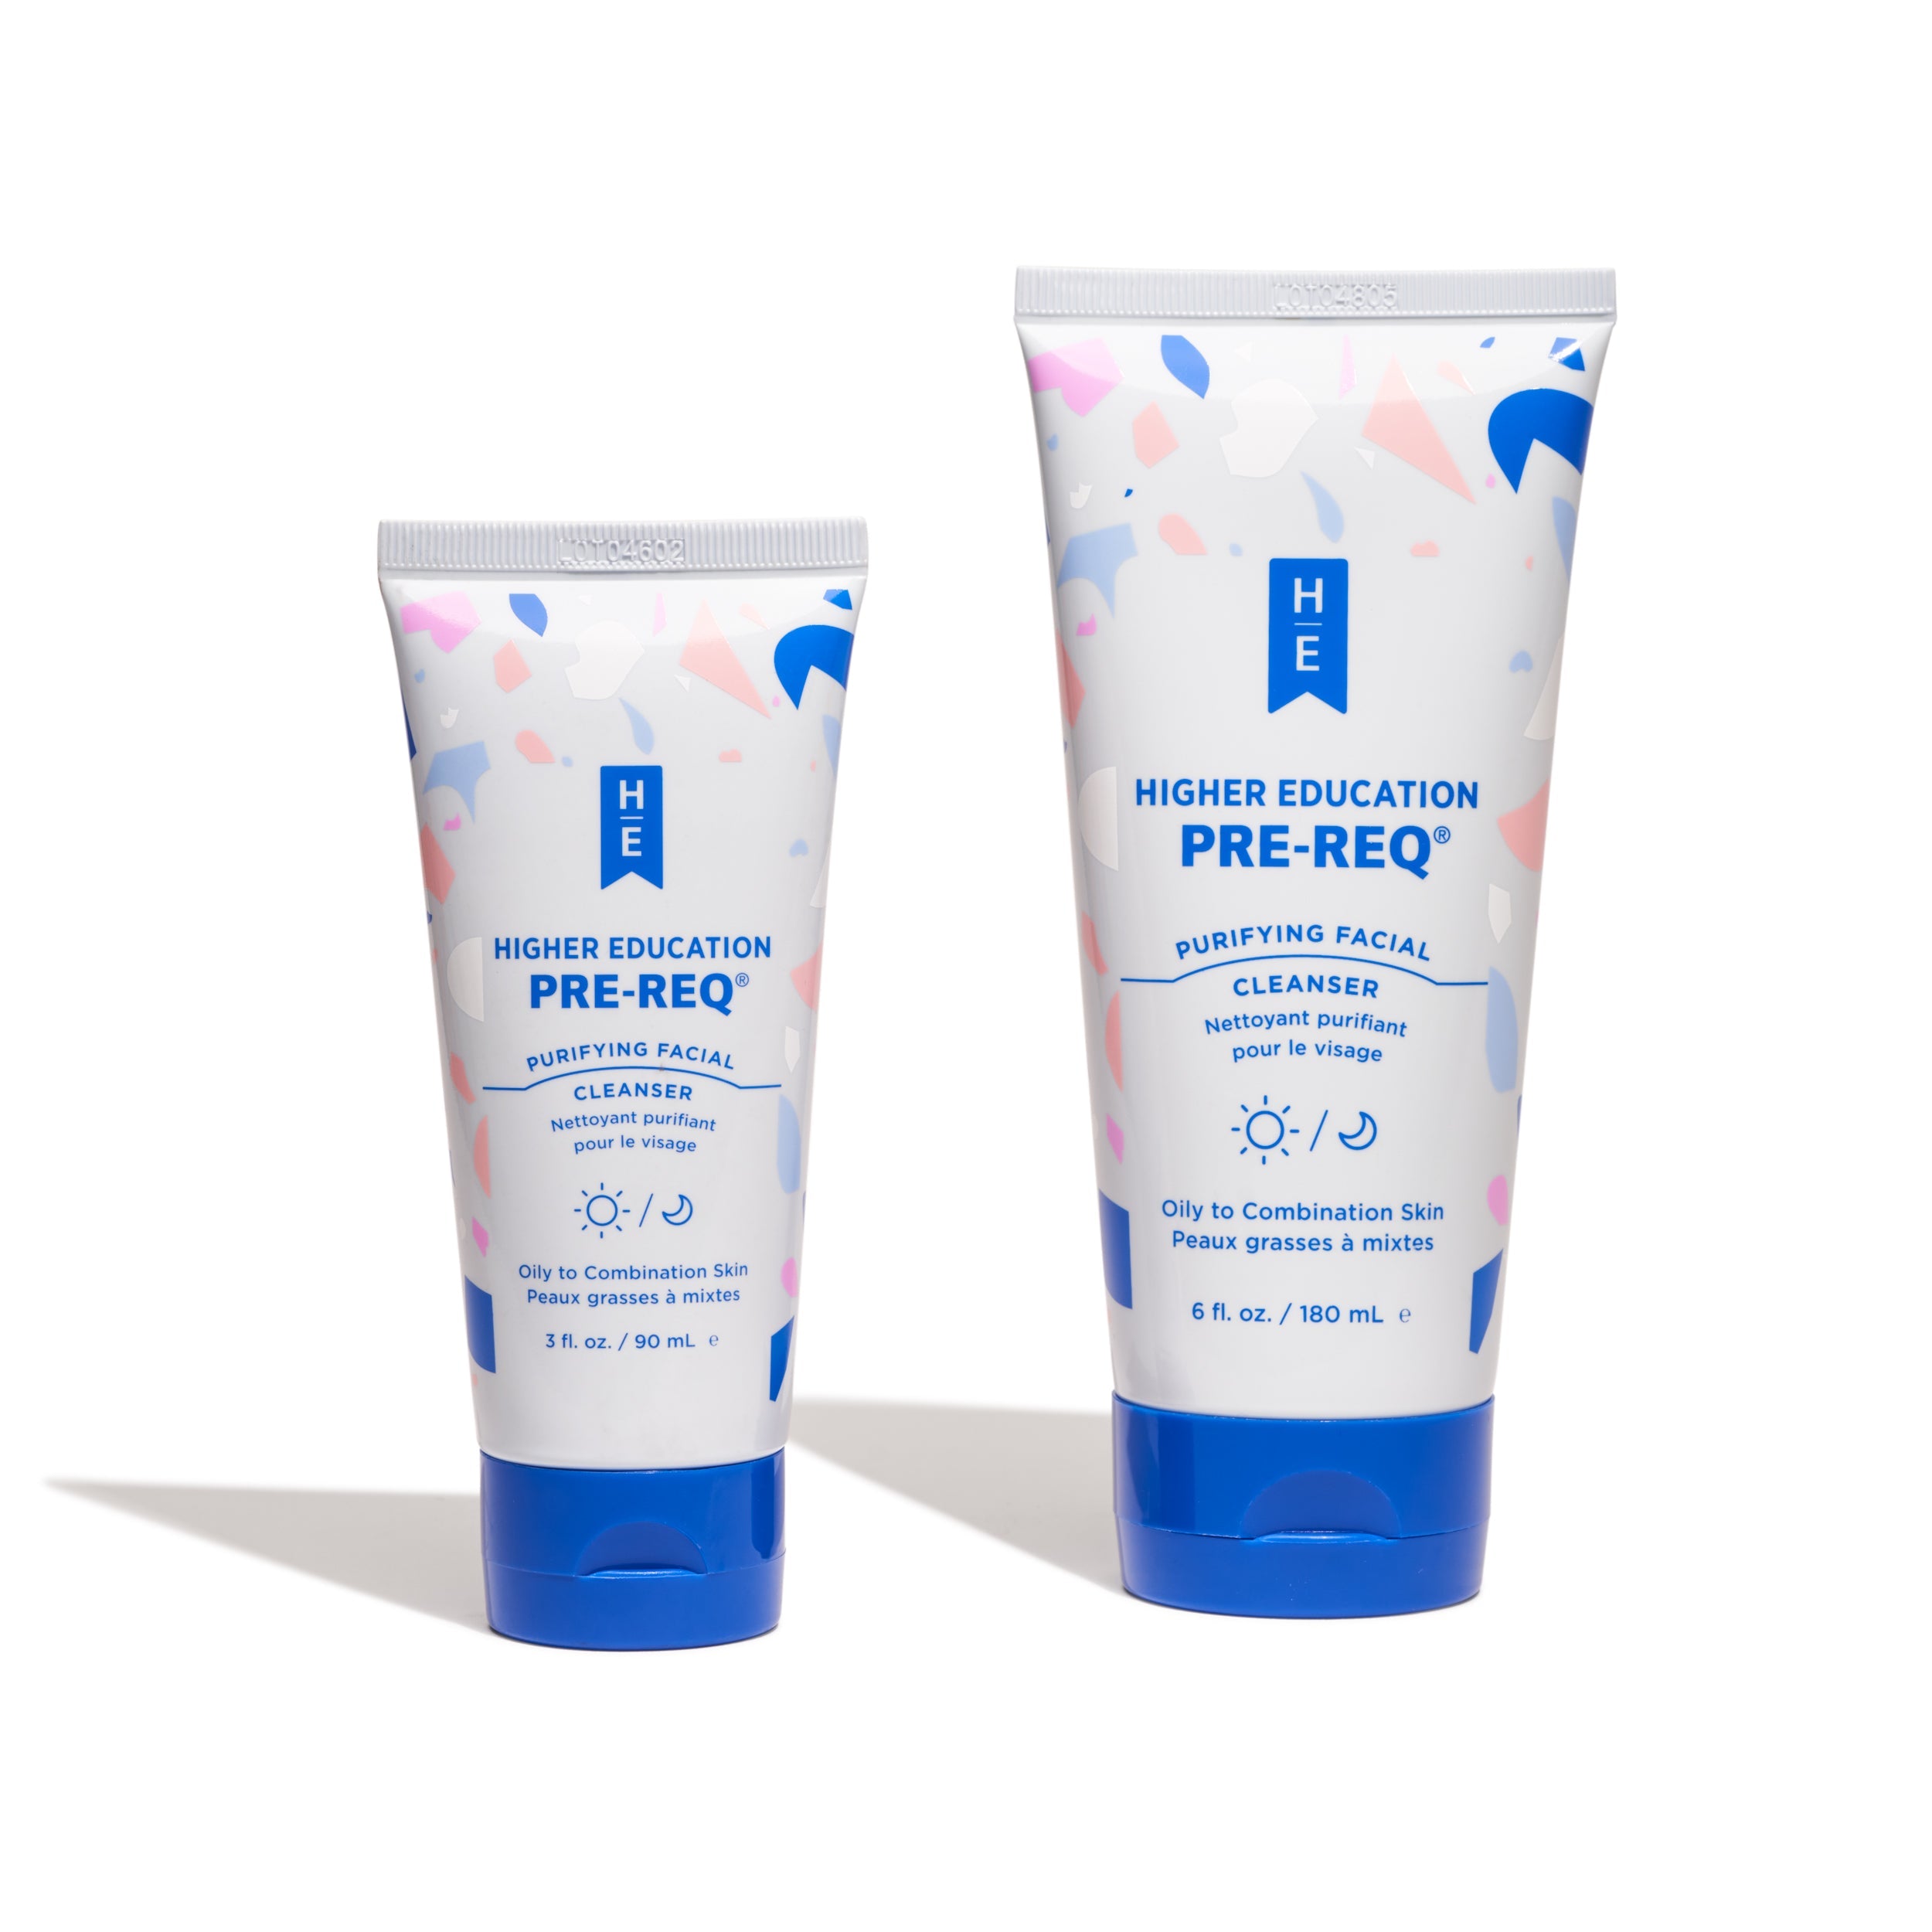 HIGHER EDUCATION PRE-REQ® Purifying Facial Cleanser